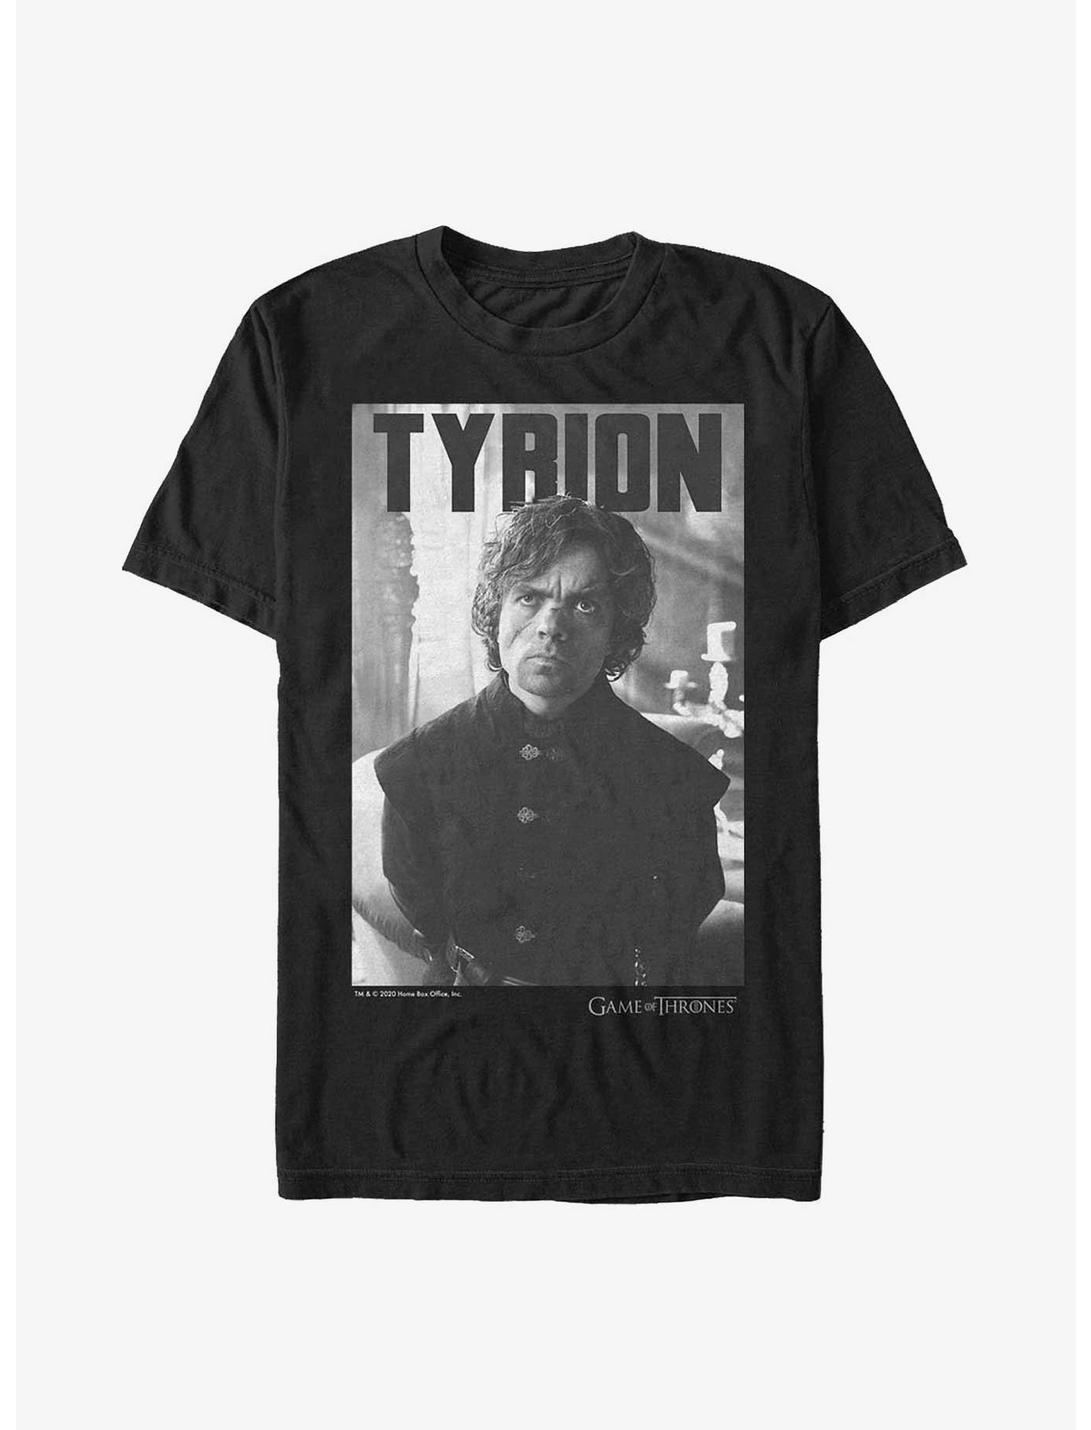 Game Of Thrones Stern Tyrion T-Shirt, BLACK, hi-res